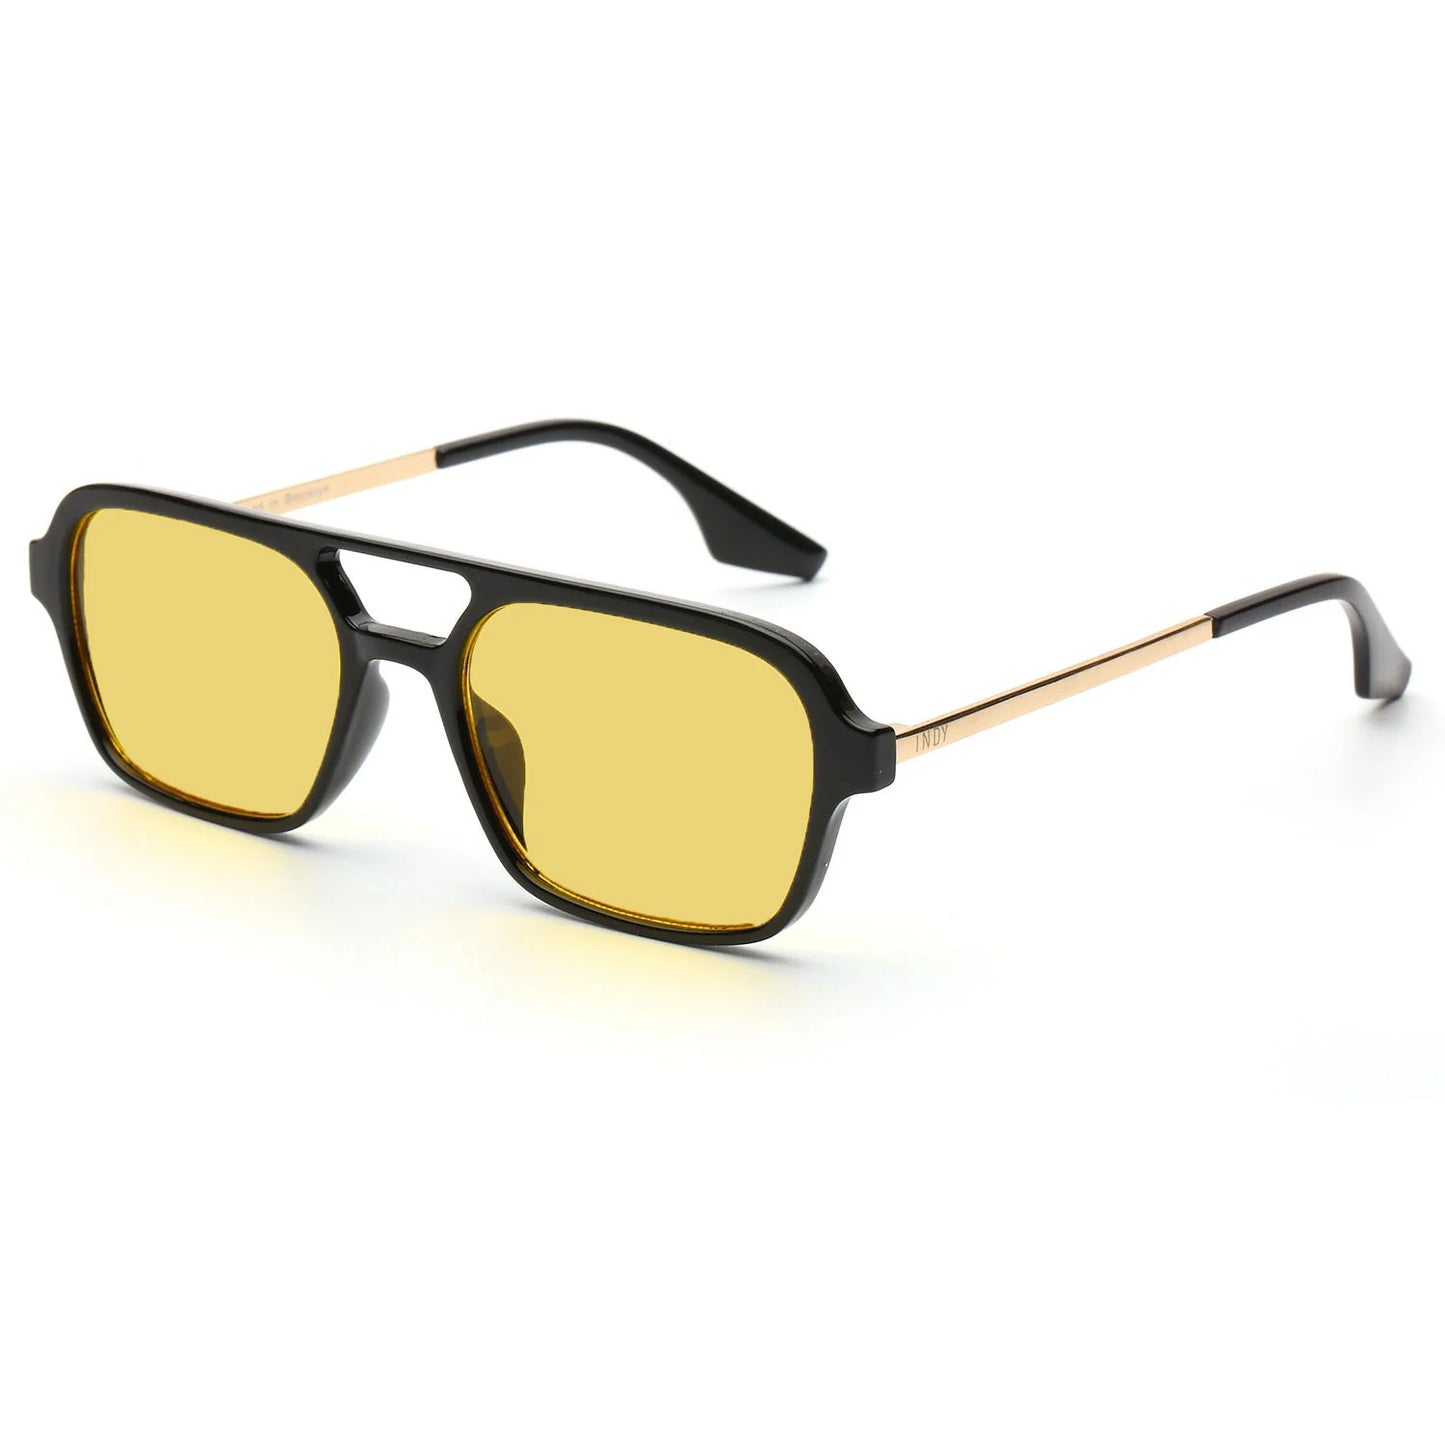 INDY Ice Cube Sunglasses in Yellow